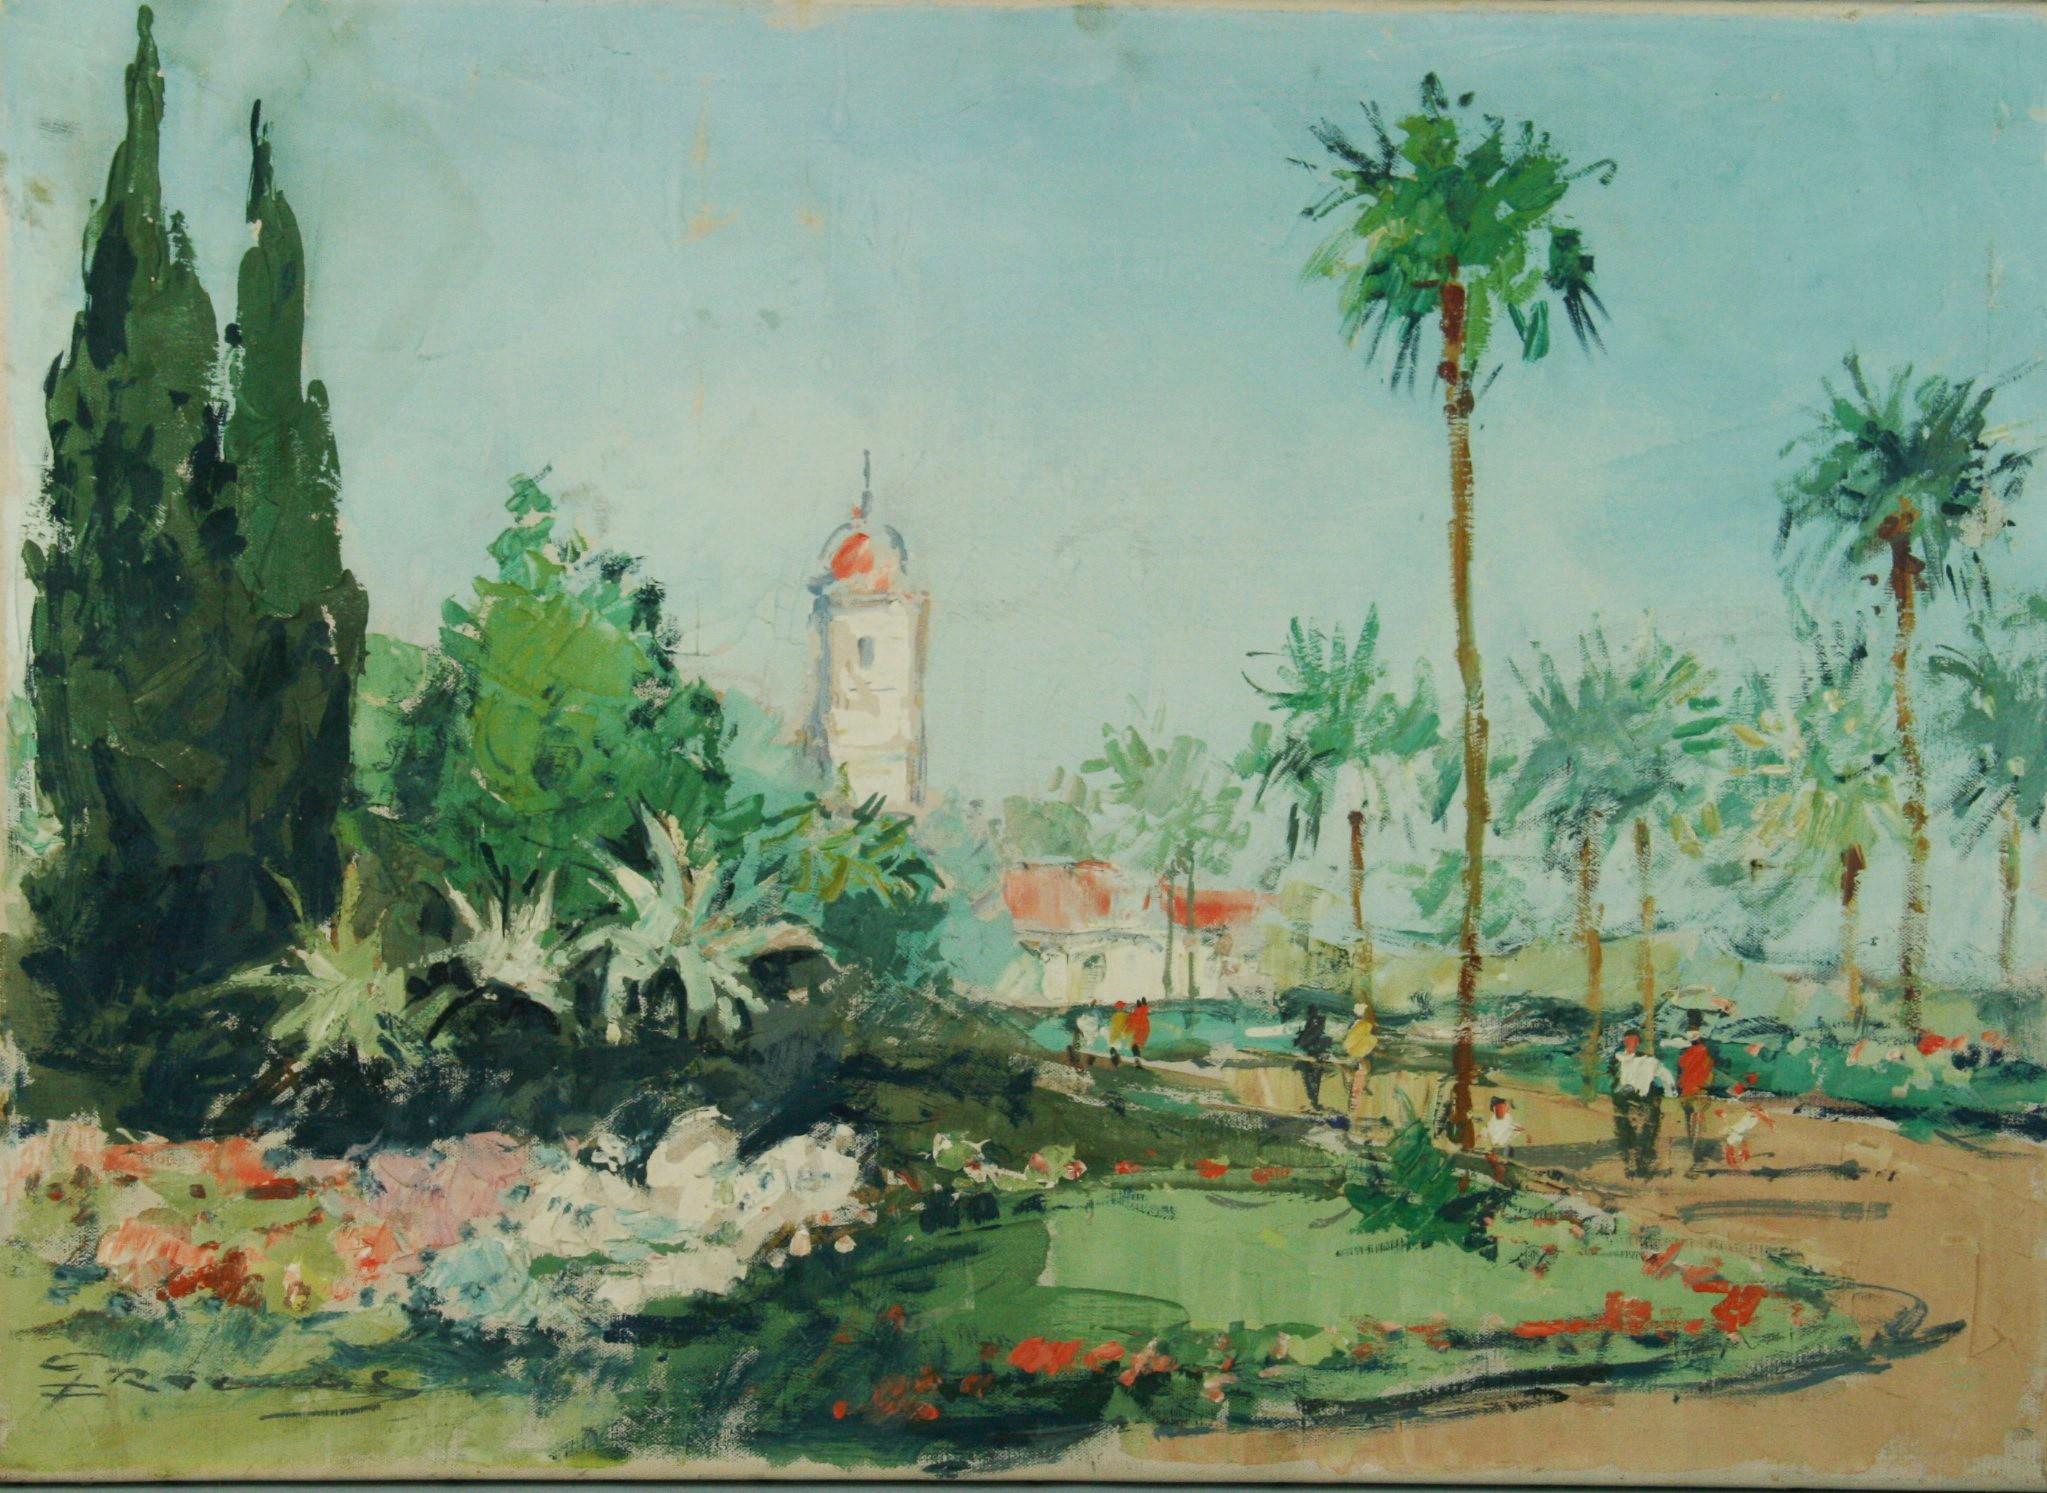 Impressionist Italian Landscape Arco Trentino 1960 - Painting by Unknown